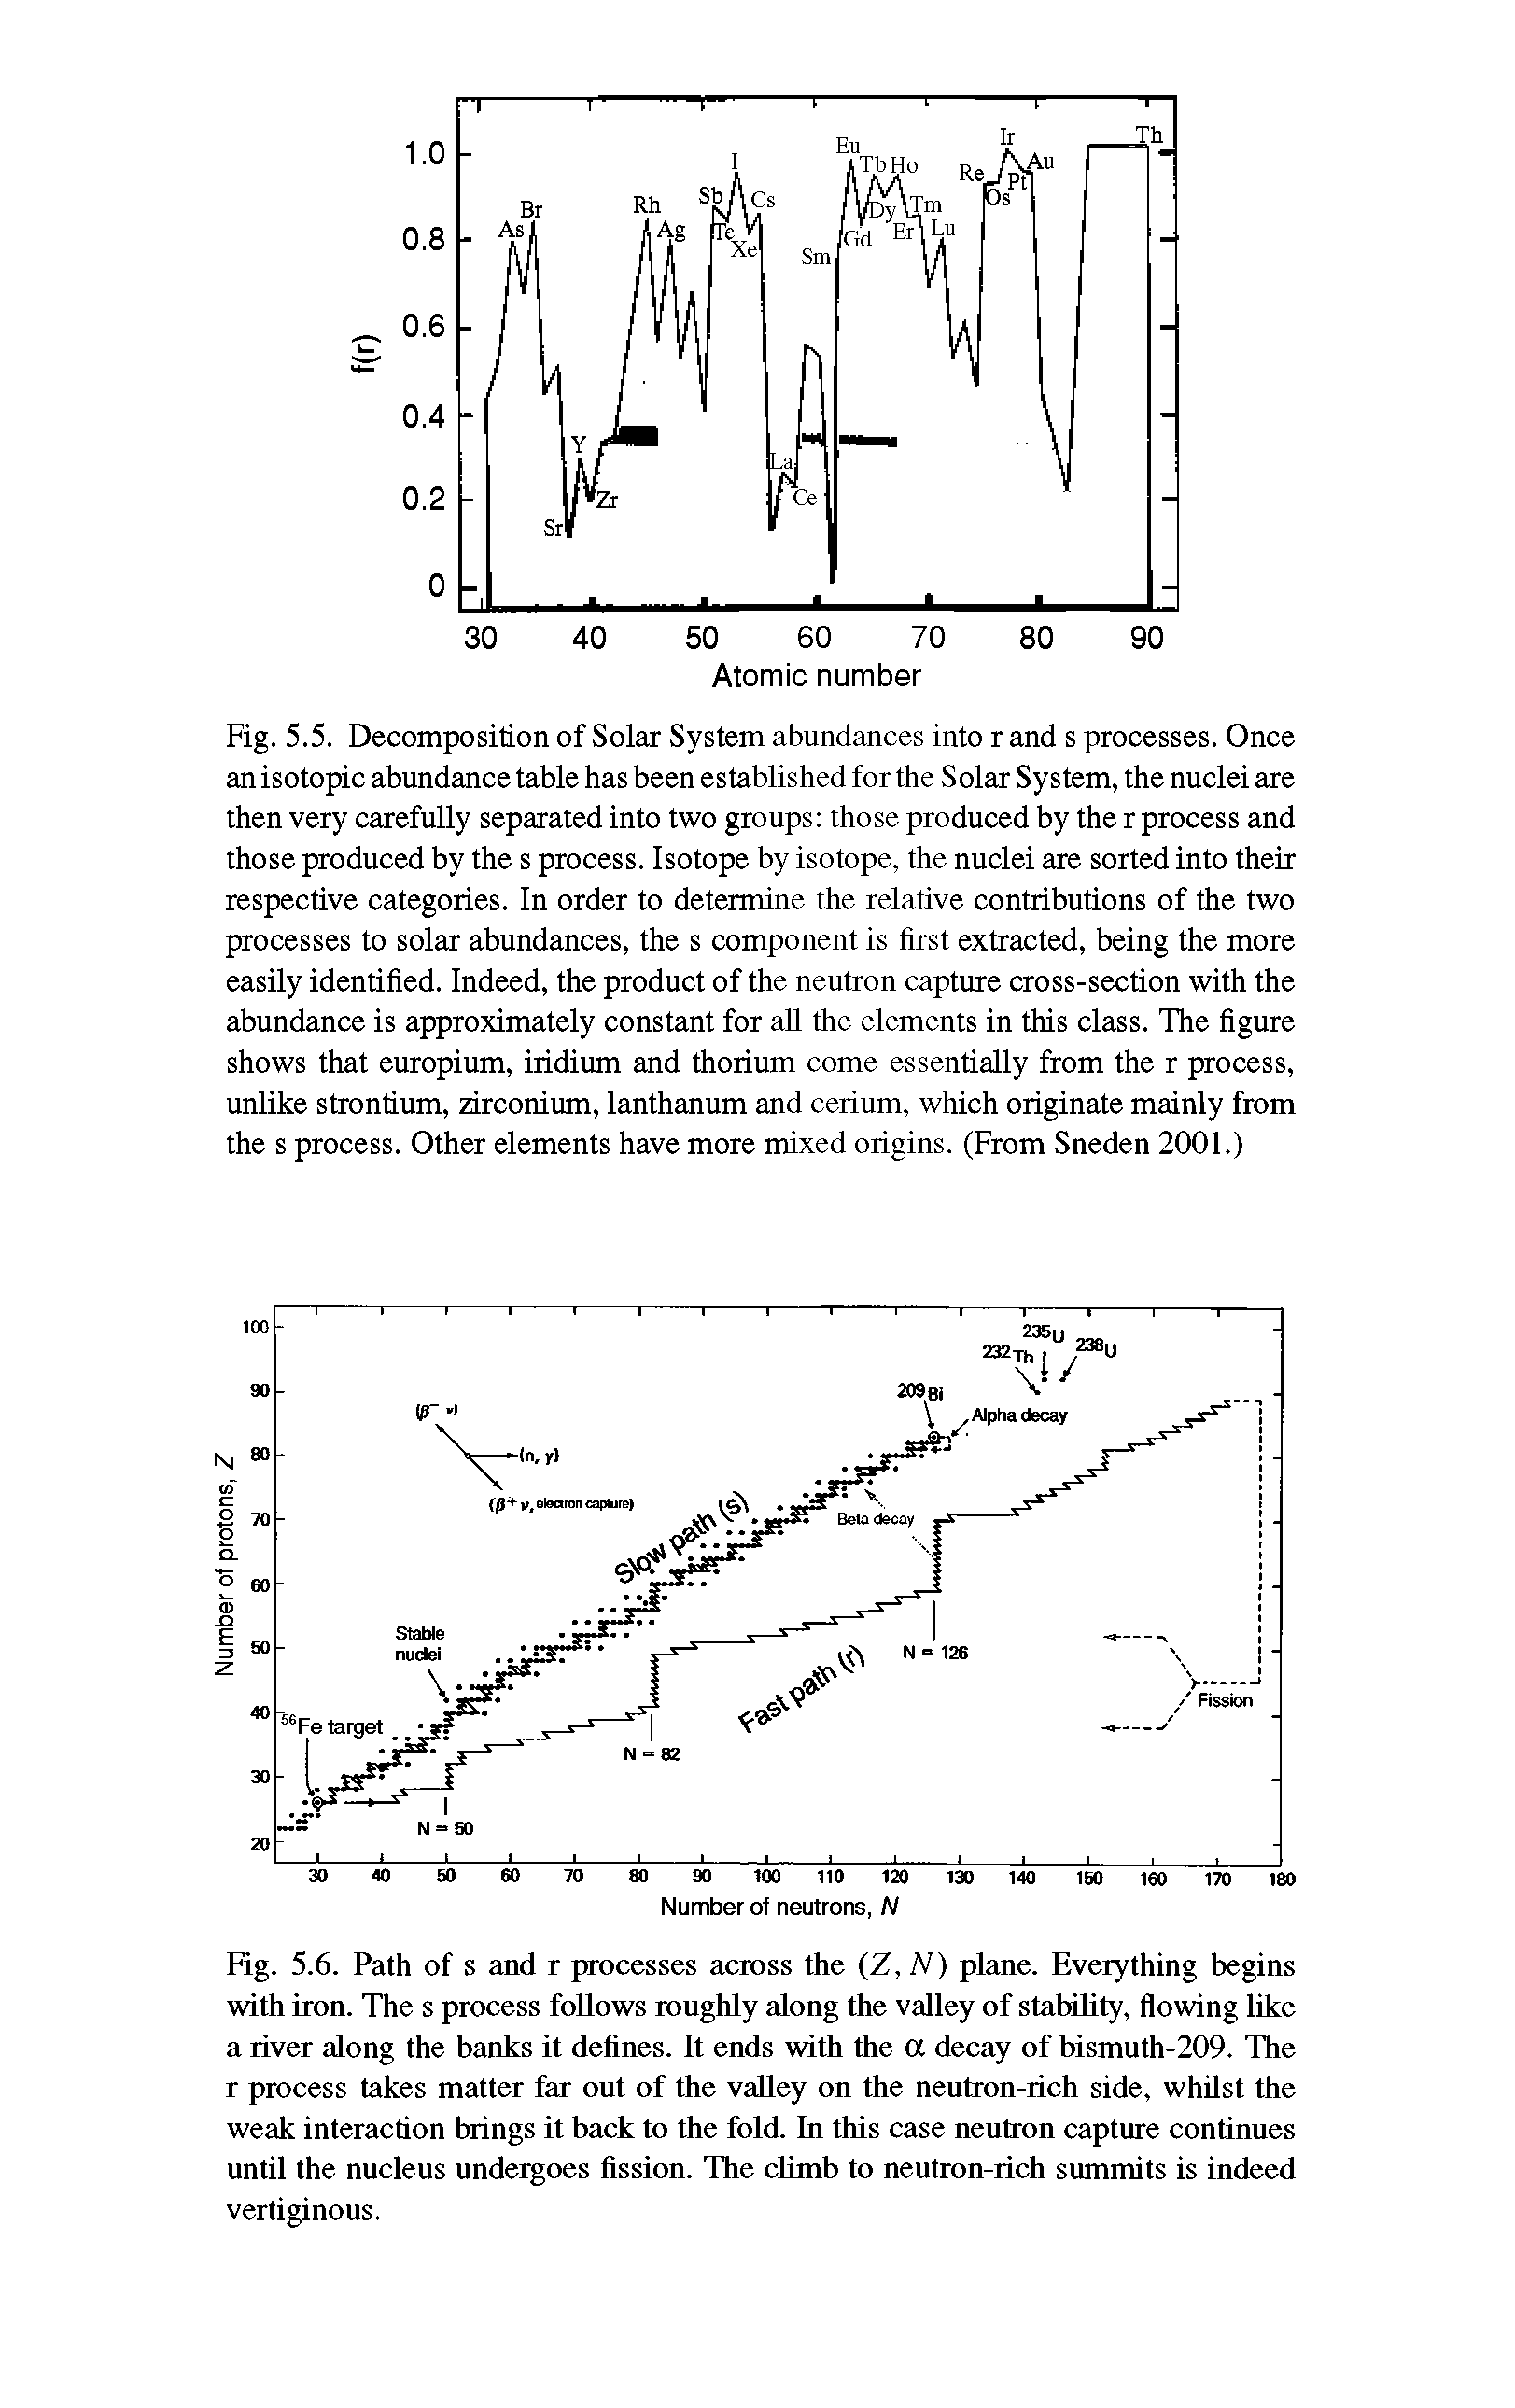 Fig. 5.6. Path of s and r processes across the Z, N) plane. Everything begins with iron. The s process follows roughly along the valley of statrility, flowing like a river along the banks it defines. It ends with the a decay of bismuth-209. The r process takes matter far out of the valley on the neutron-rich side, whilst the weak interaction brings it back to the fold. In this case neutron capture continues until the nucleus undergoes fission. The climb to neutron-rich summits is indeed vertiginous.